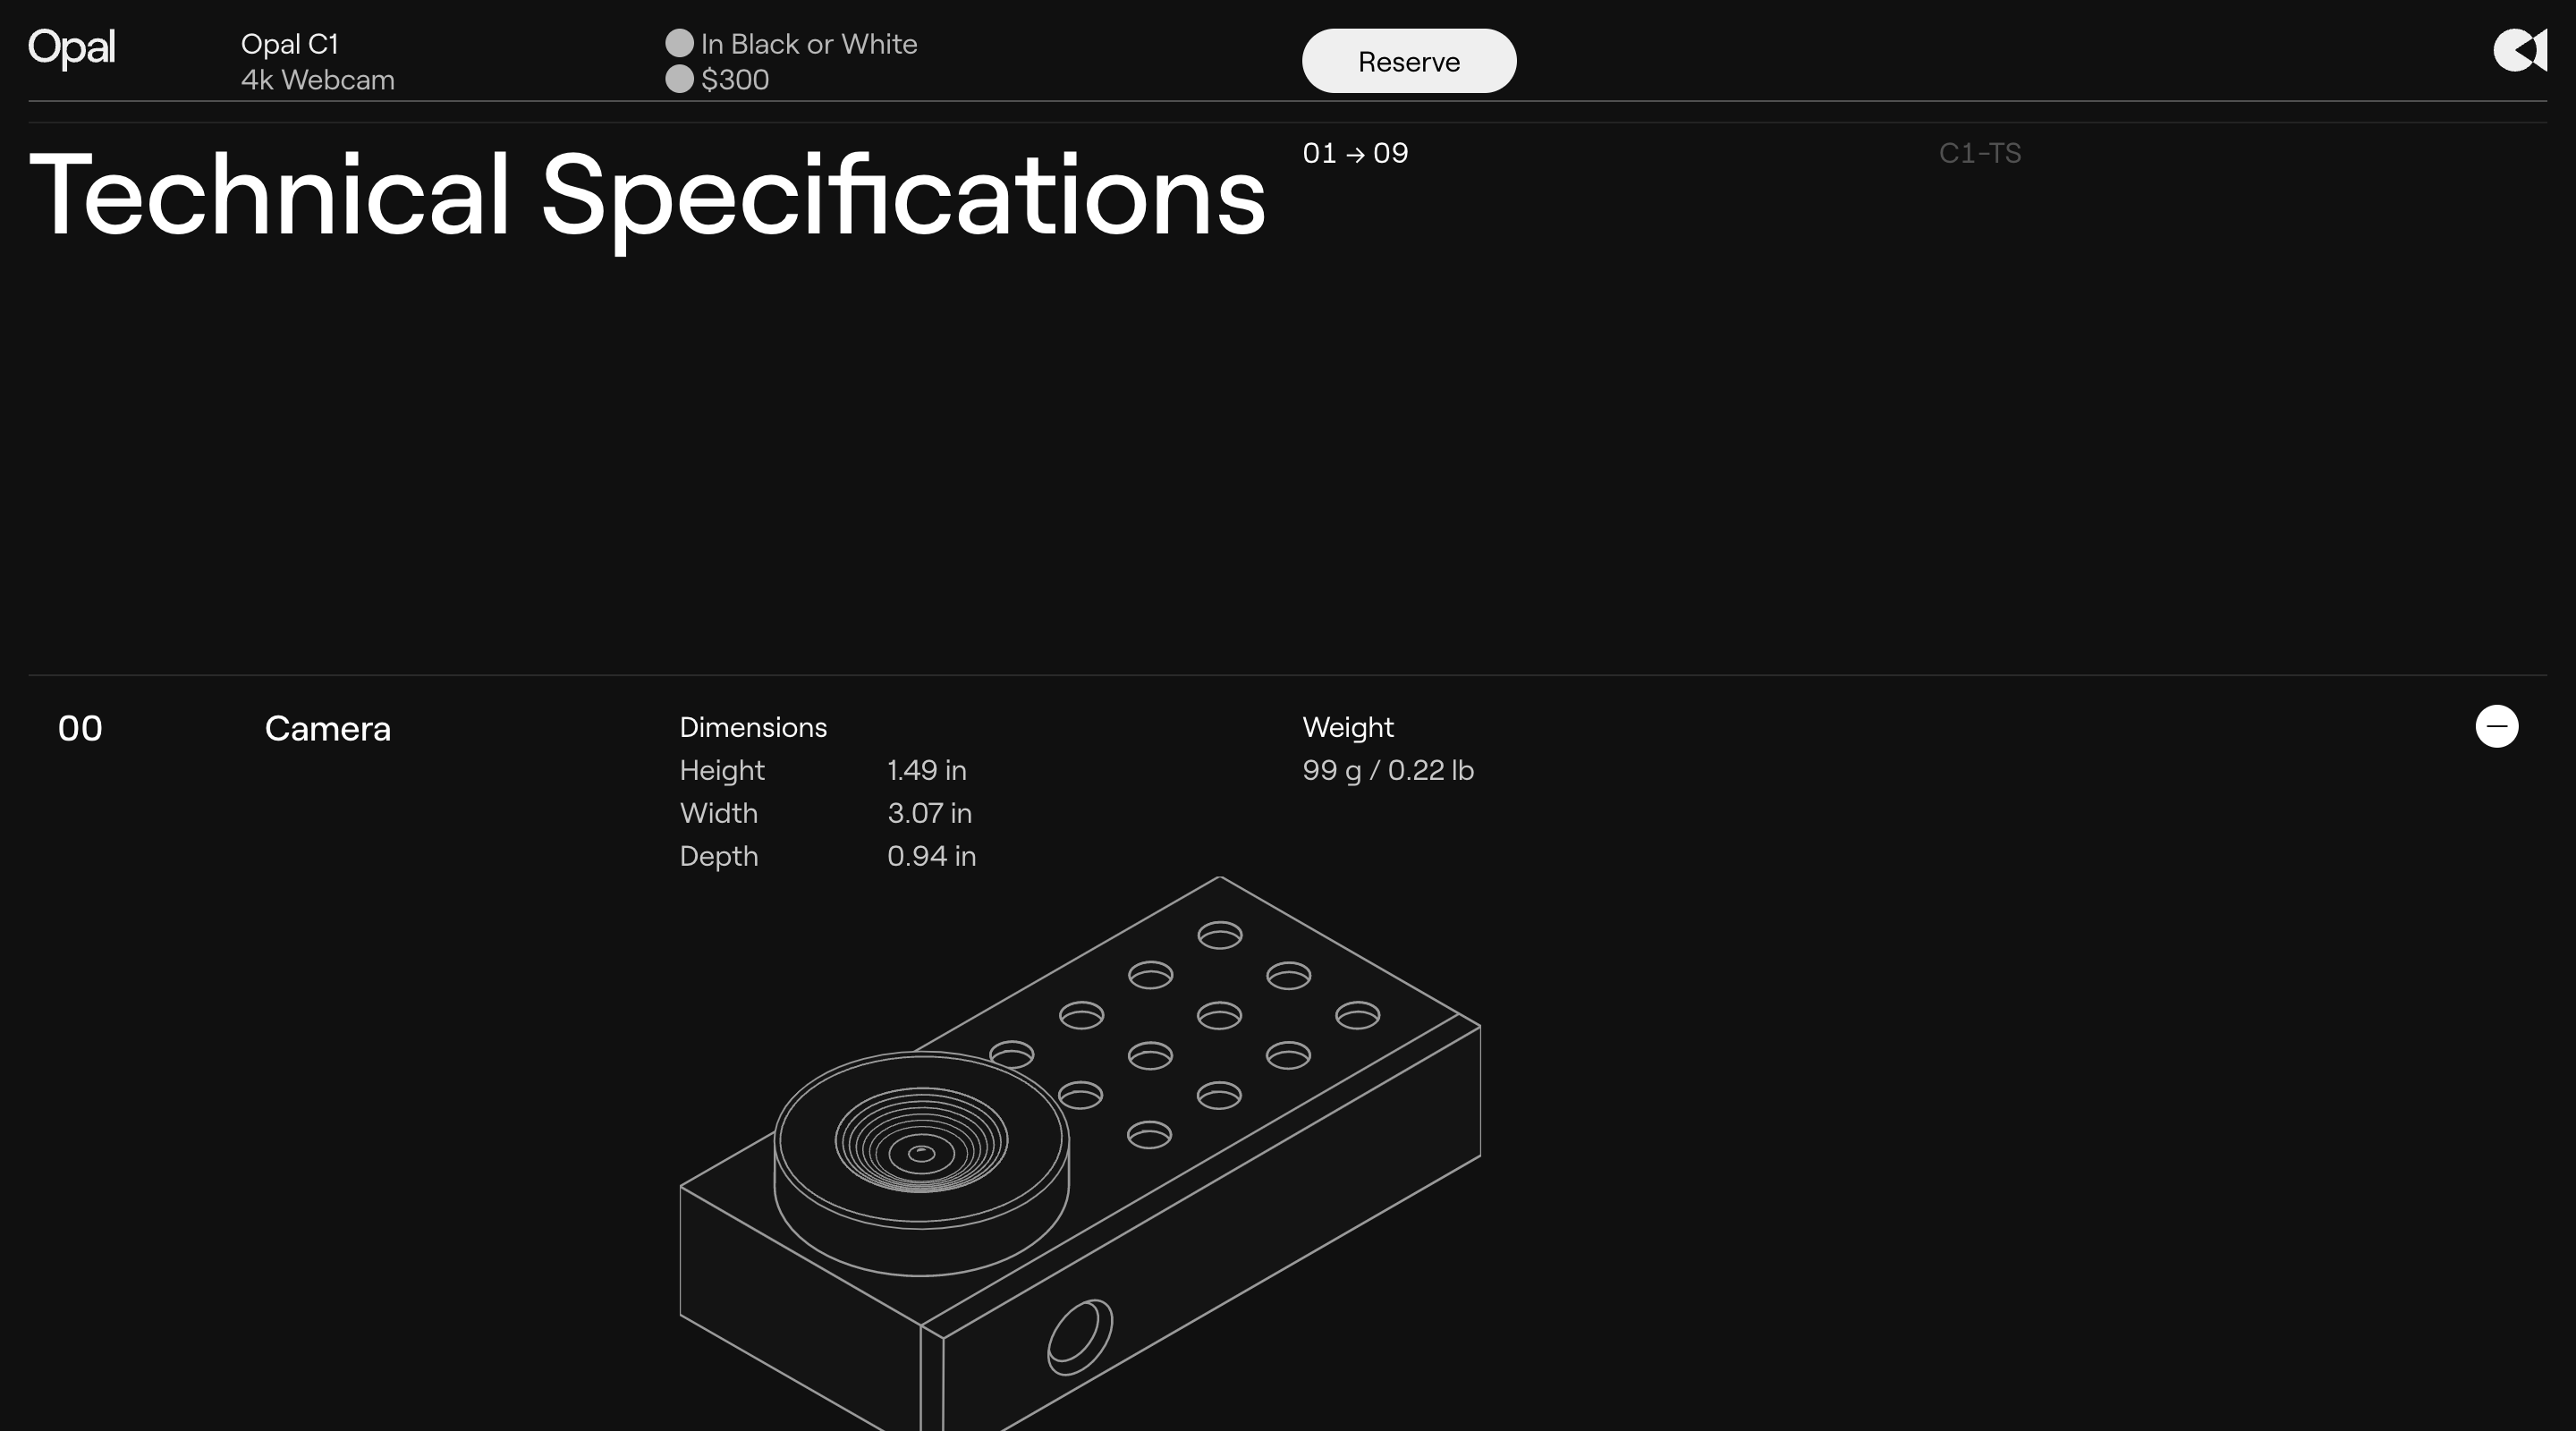 Screenshot of the 'Technical Specifications' section of the Opal website. The header contains the Opal logo, brief product information, and a 'Reserve' button. Underneath is the page title in large lettering, followed by a 3D outline of the Opal camera and its dimensions and weight specifications.